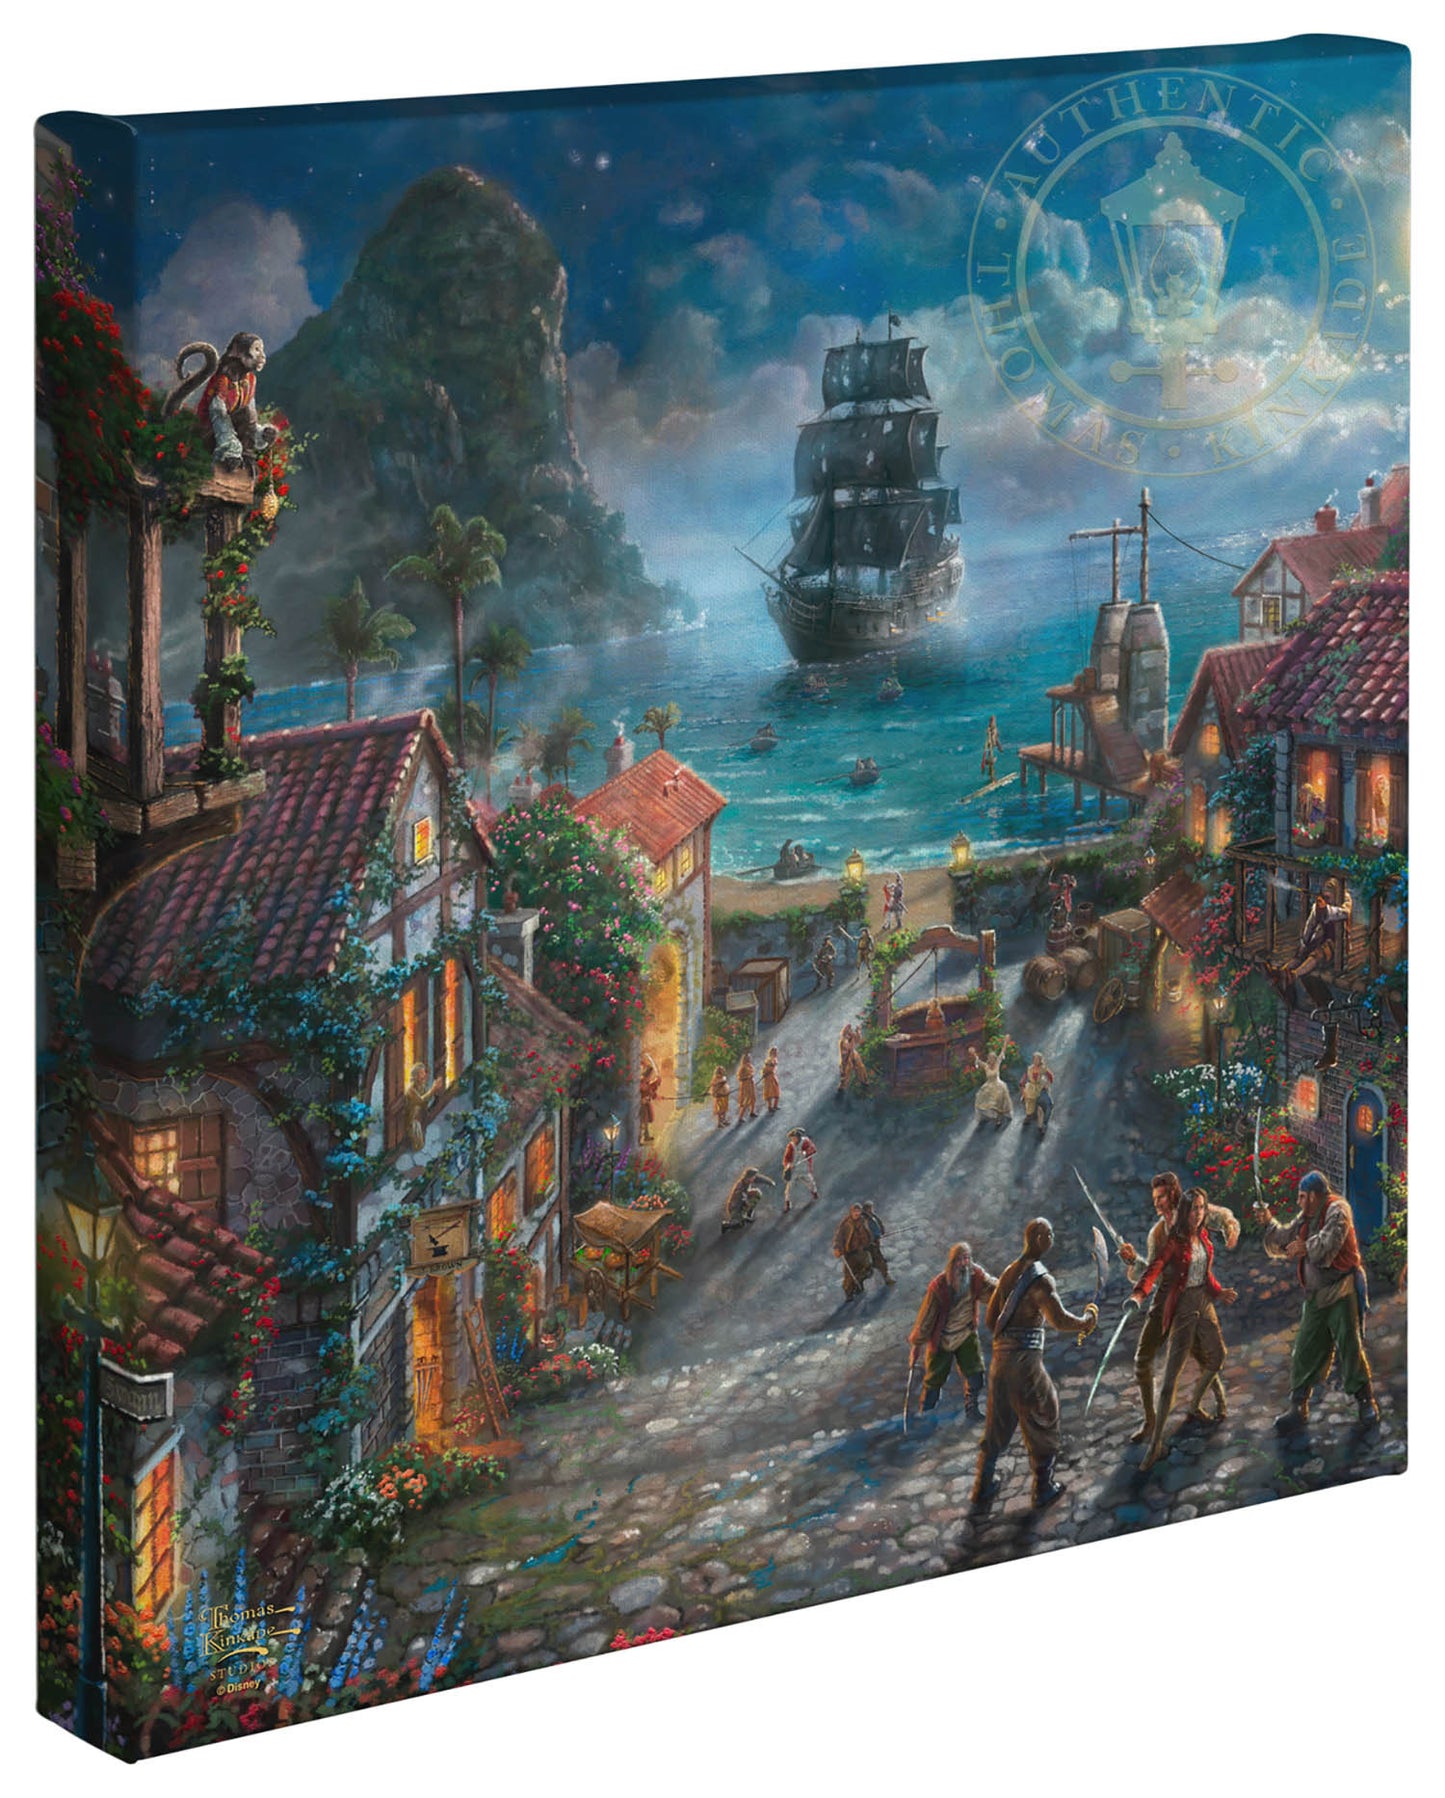 Thomas Kinkade Disney Dreams "Pirates of the Caribbean" Limited and Open Canvas Giclee